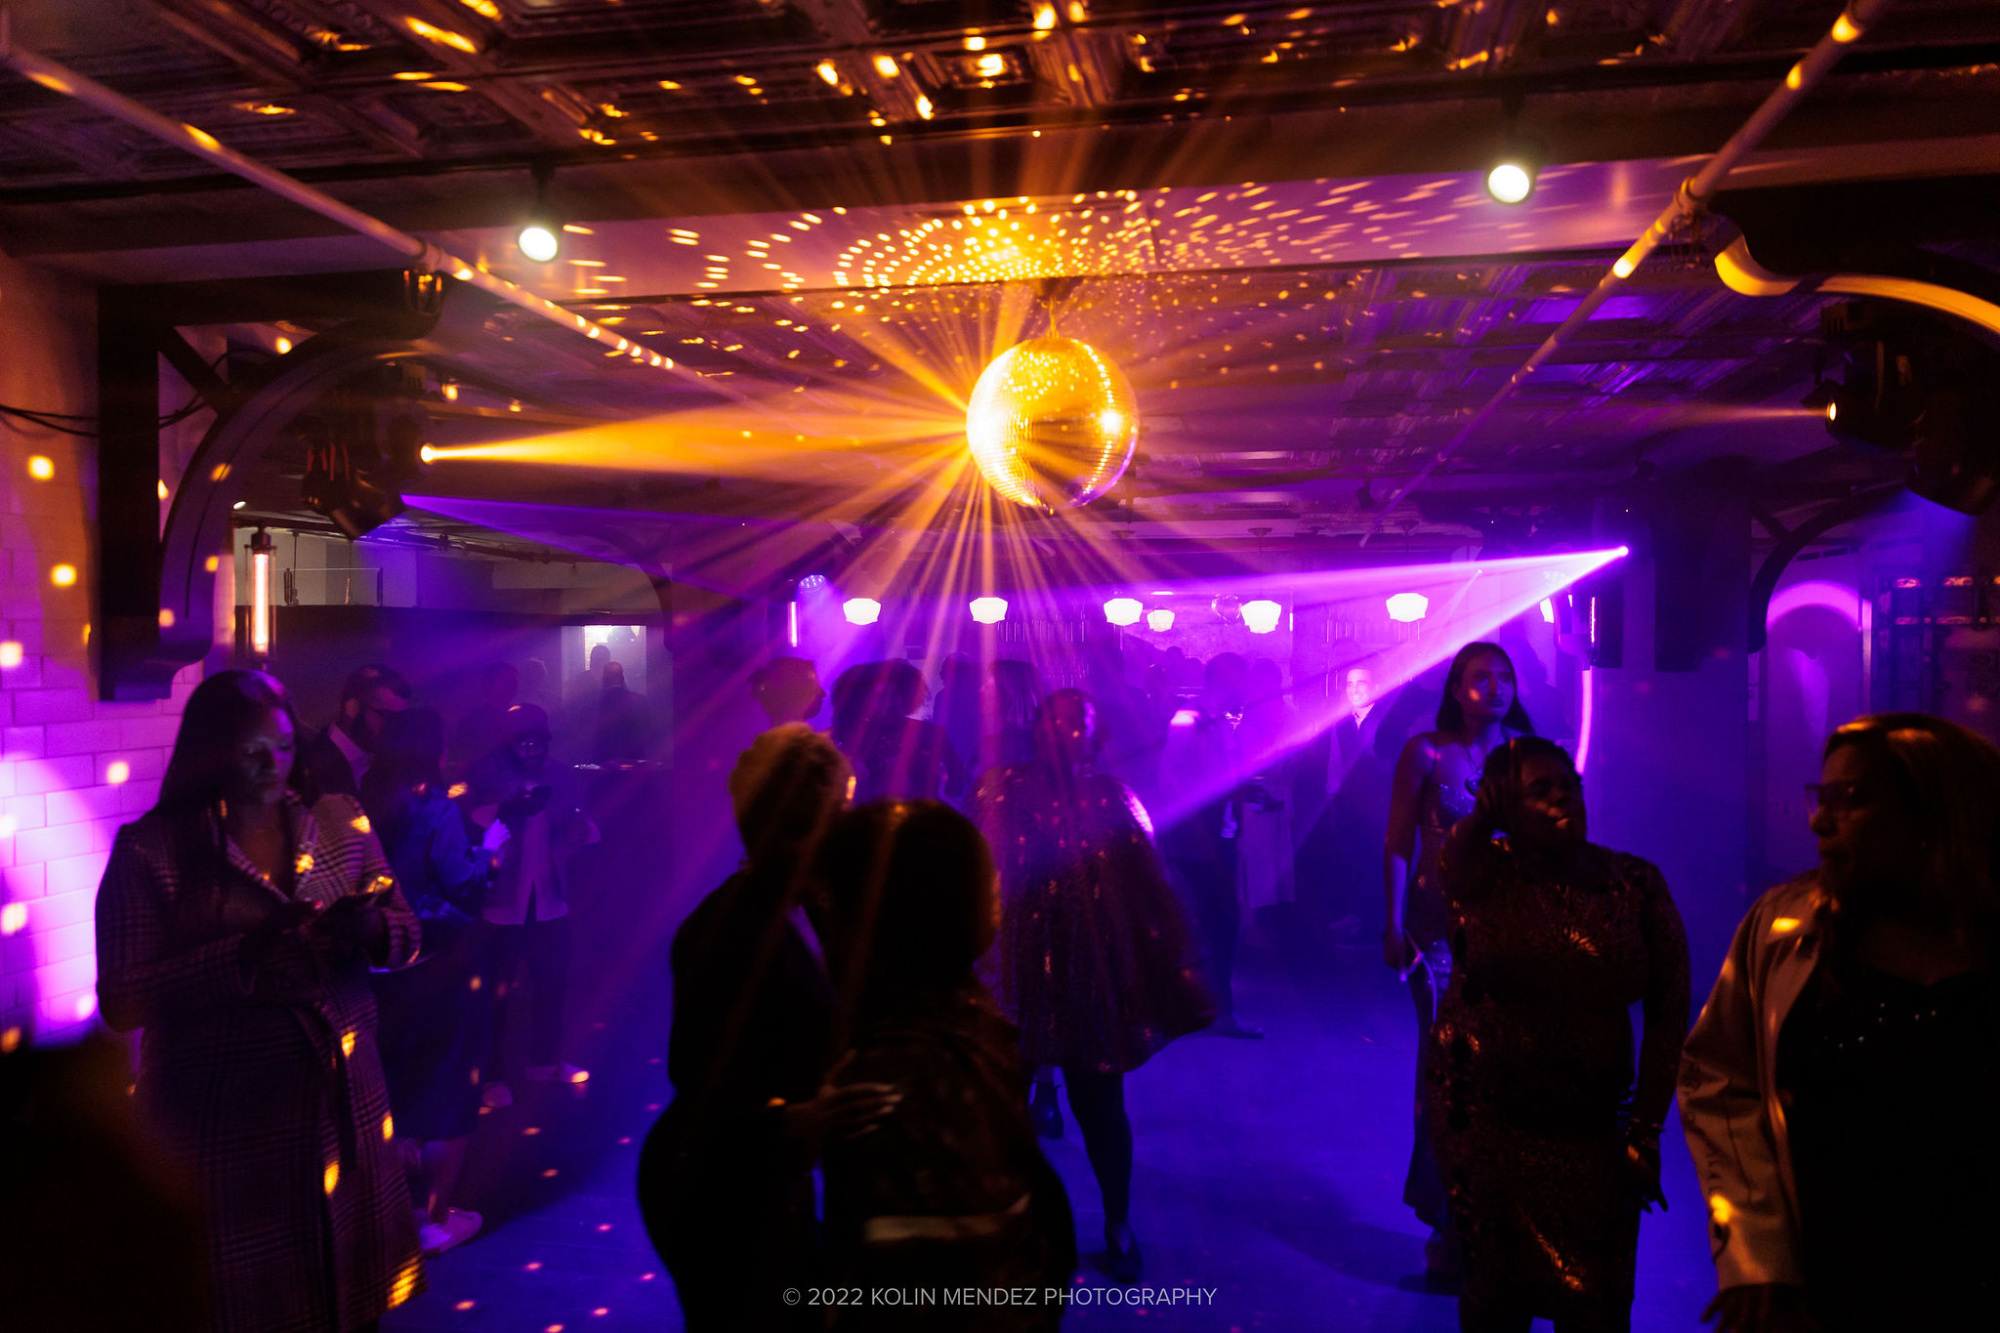 People dancing under a disco ball in a dimly lit club with colorful lights and haze.